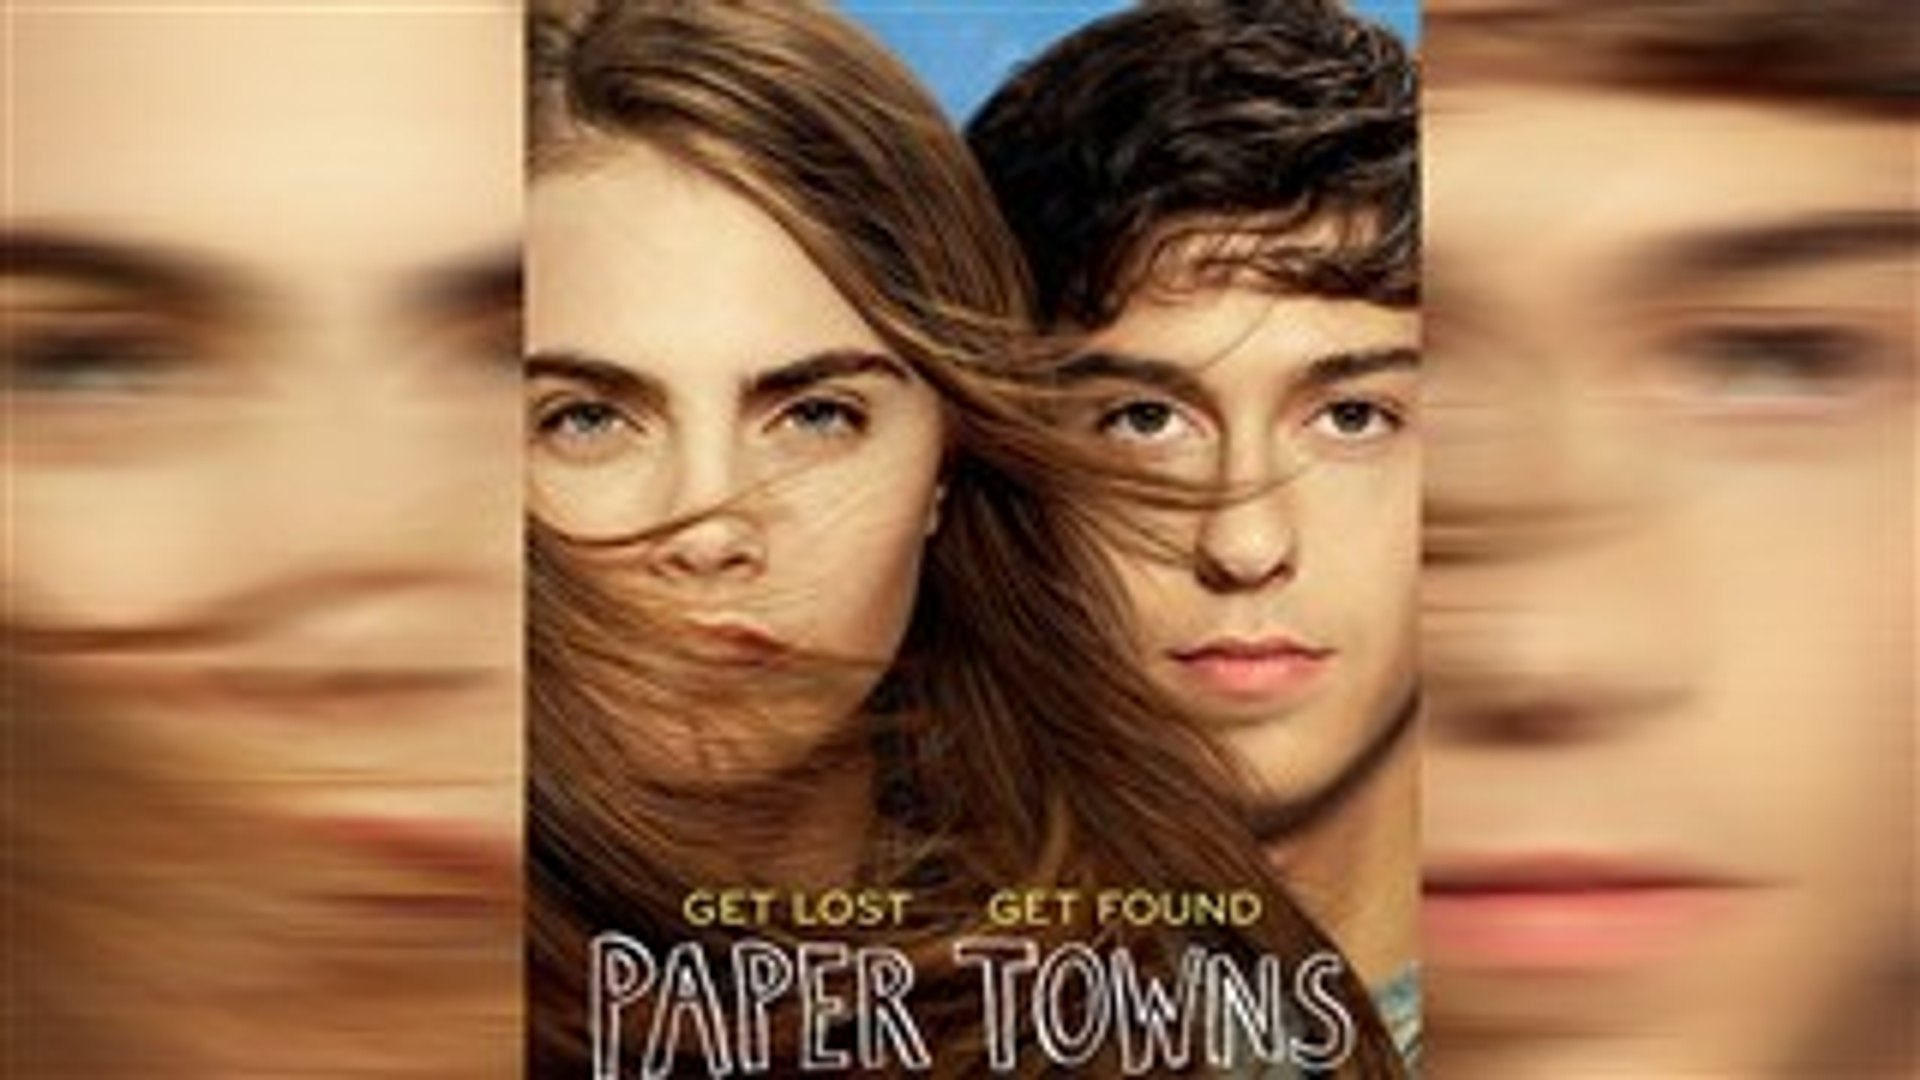 54 Top Photos Paper Towns Full Movie Download : Free Hd Movie Download Site Paper Towns Full Movie Download Hd 20th Century Fox